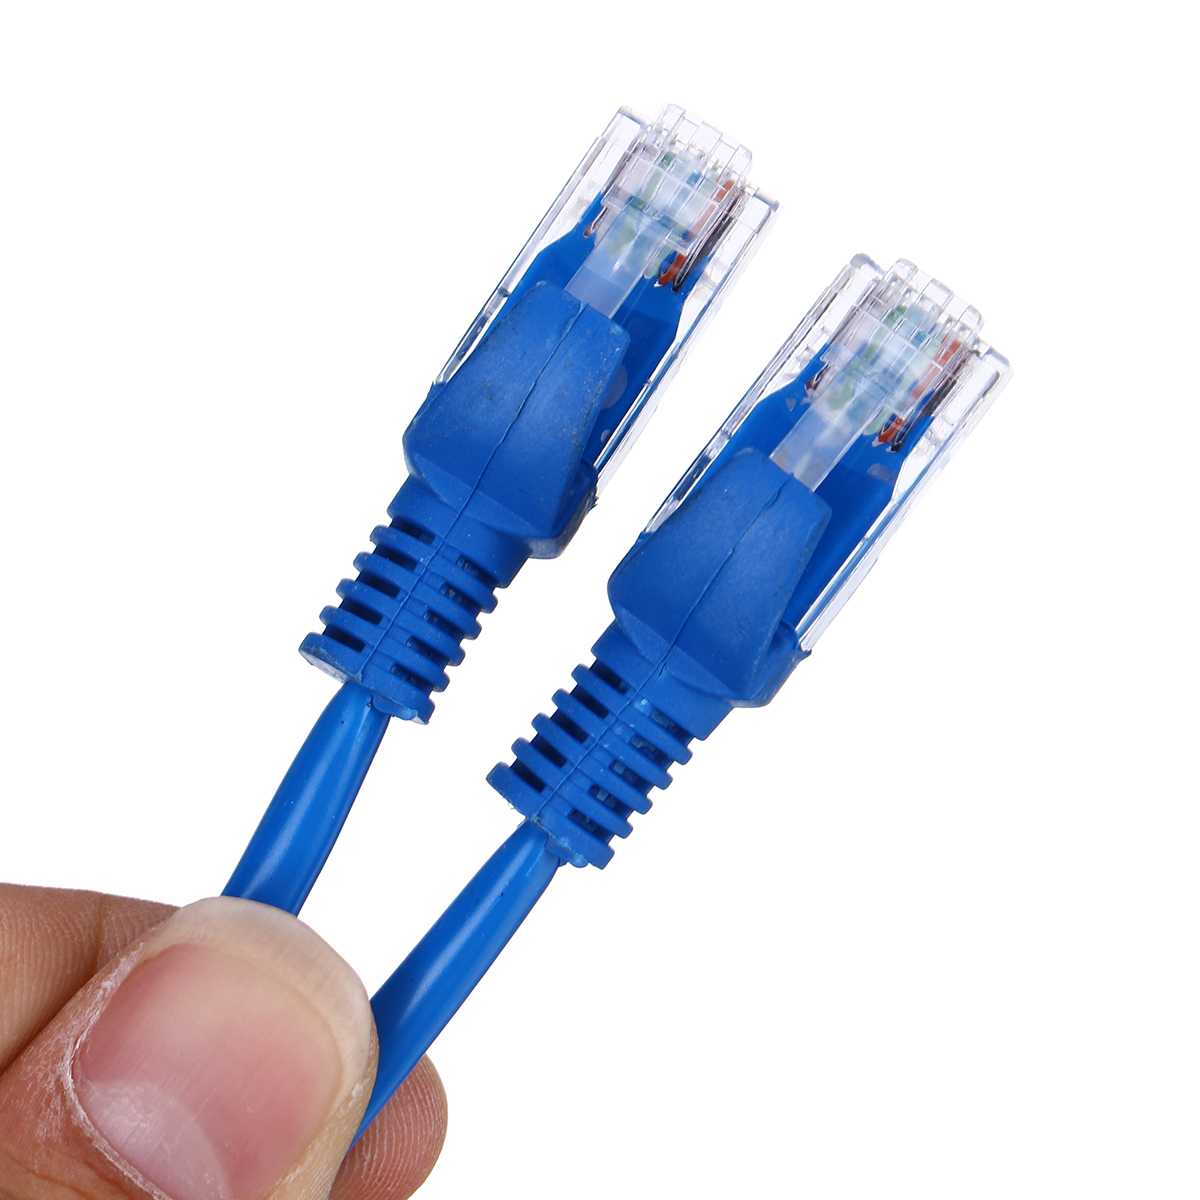 Fast-RJ-45---Male-To-Male-Network-Ethernet-LAN-Cable-Wire-10m15m20m30m50m-1567247-7